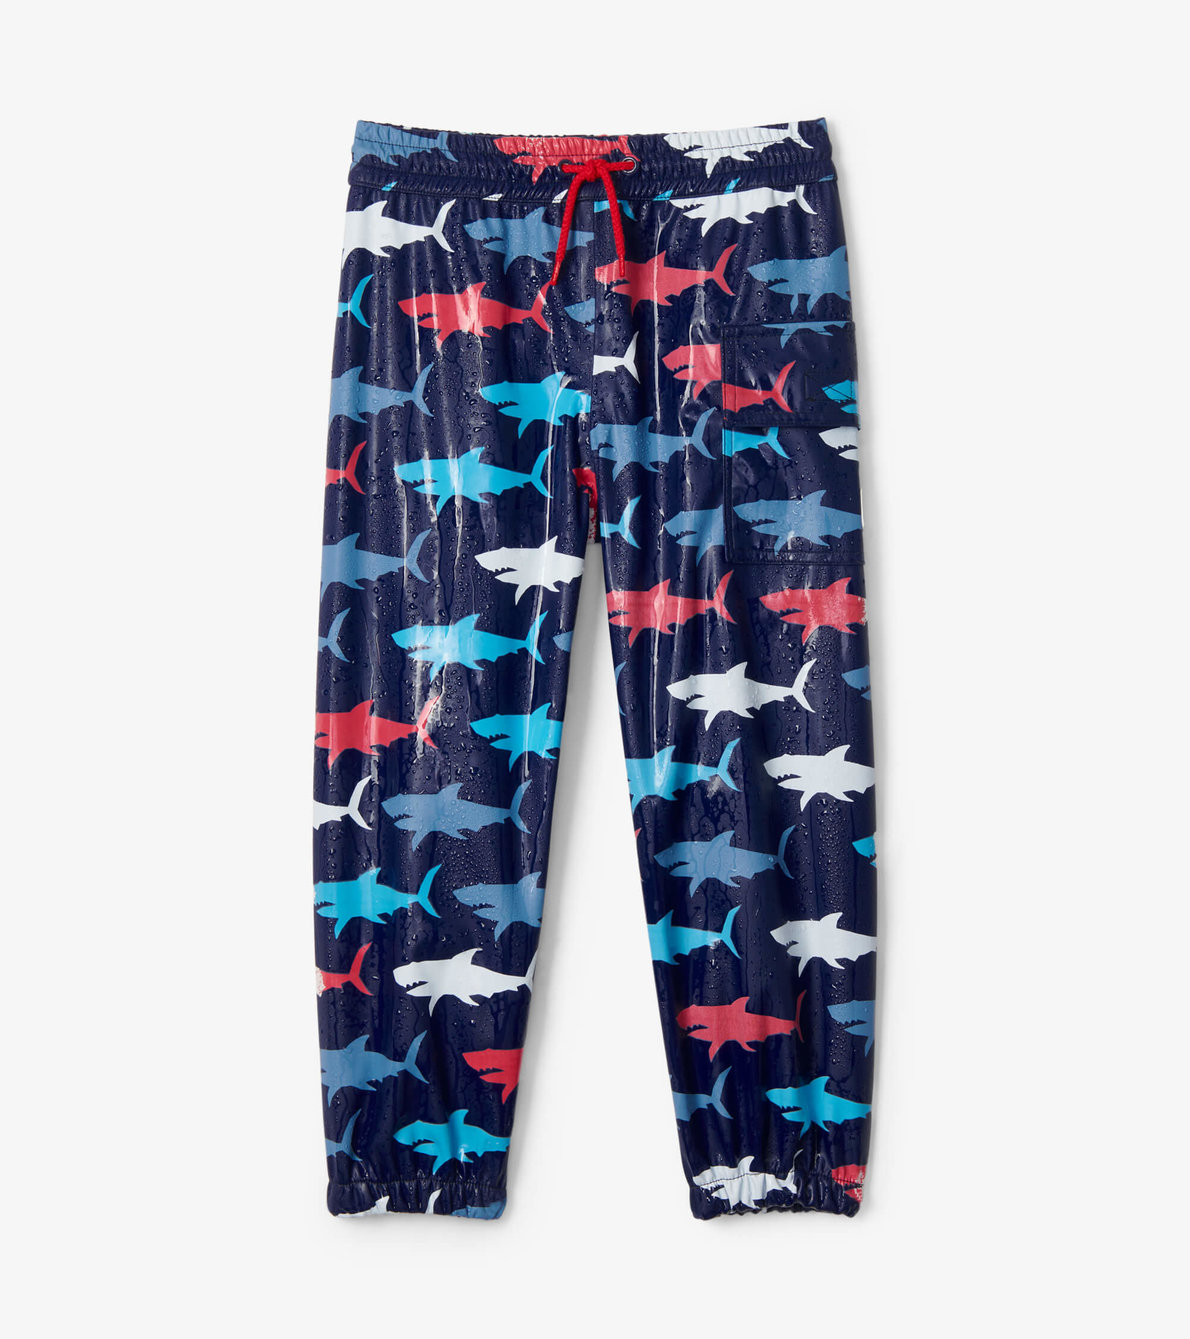 View larger image of Hungry Sharks Colour Changing Kids Rain Pants